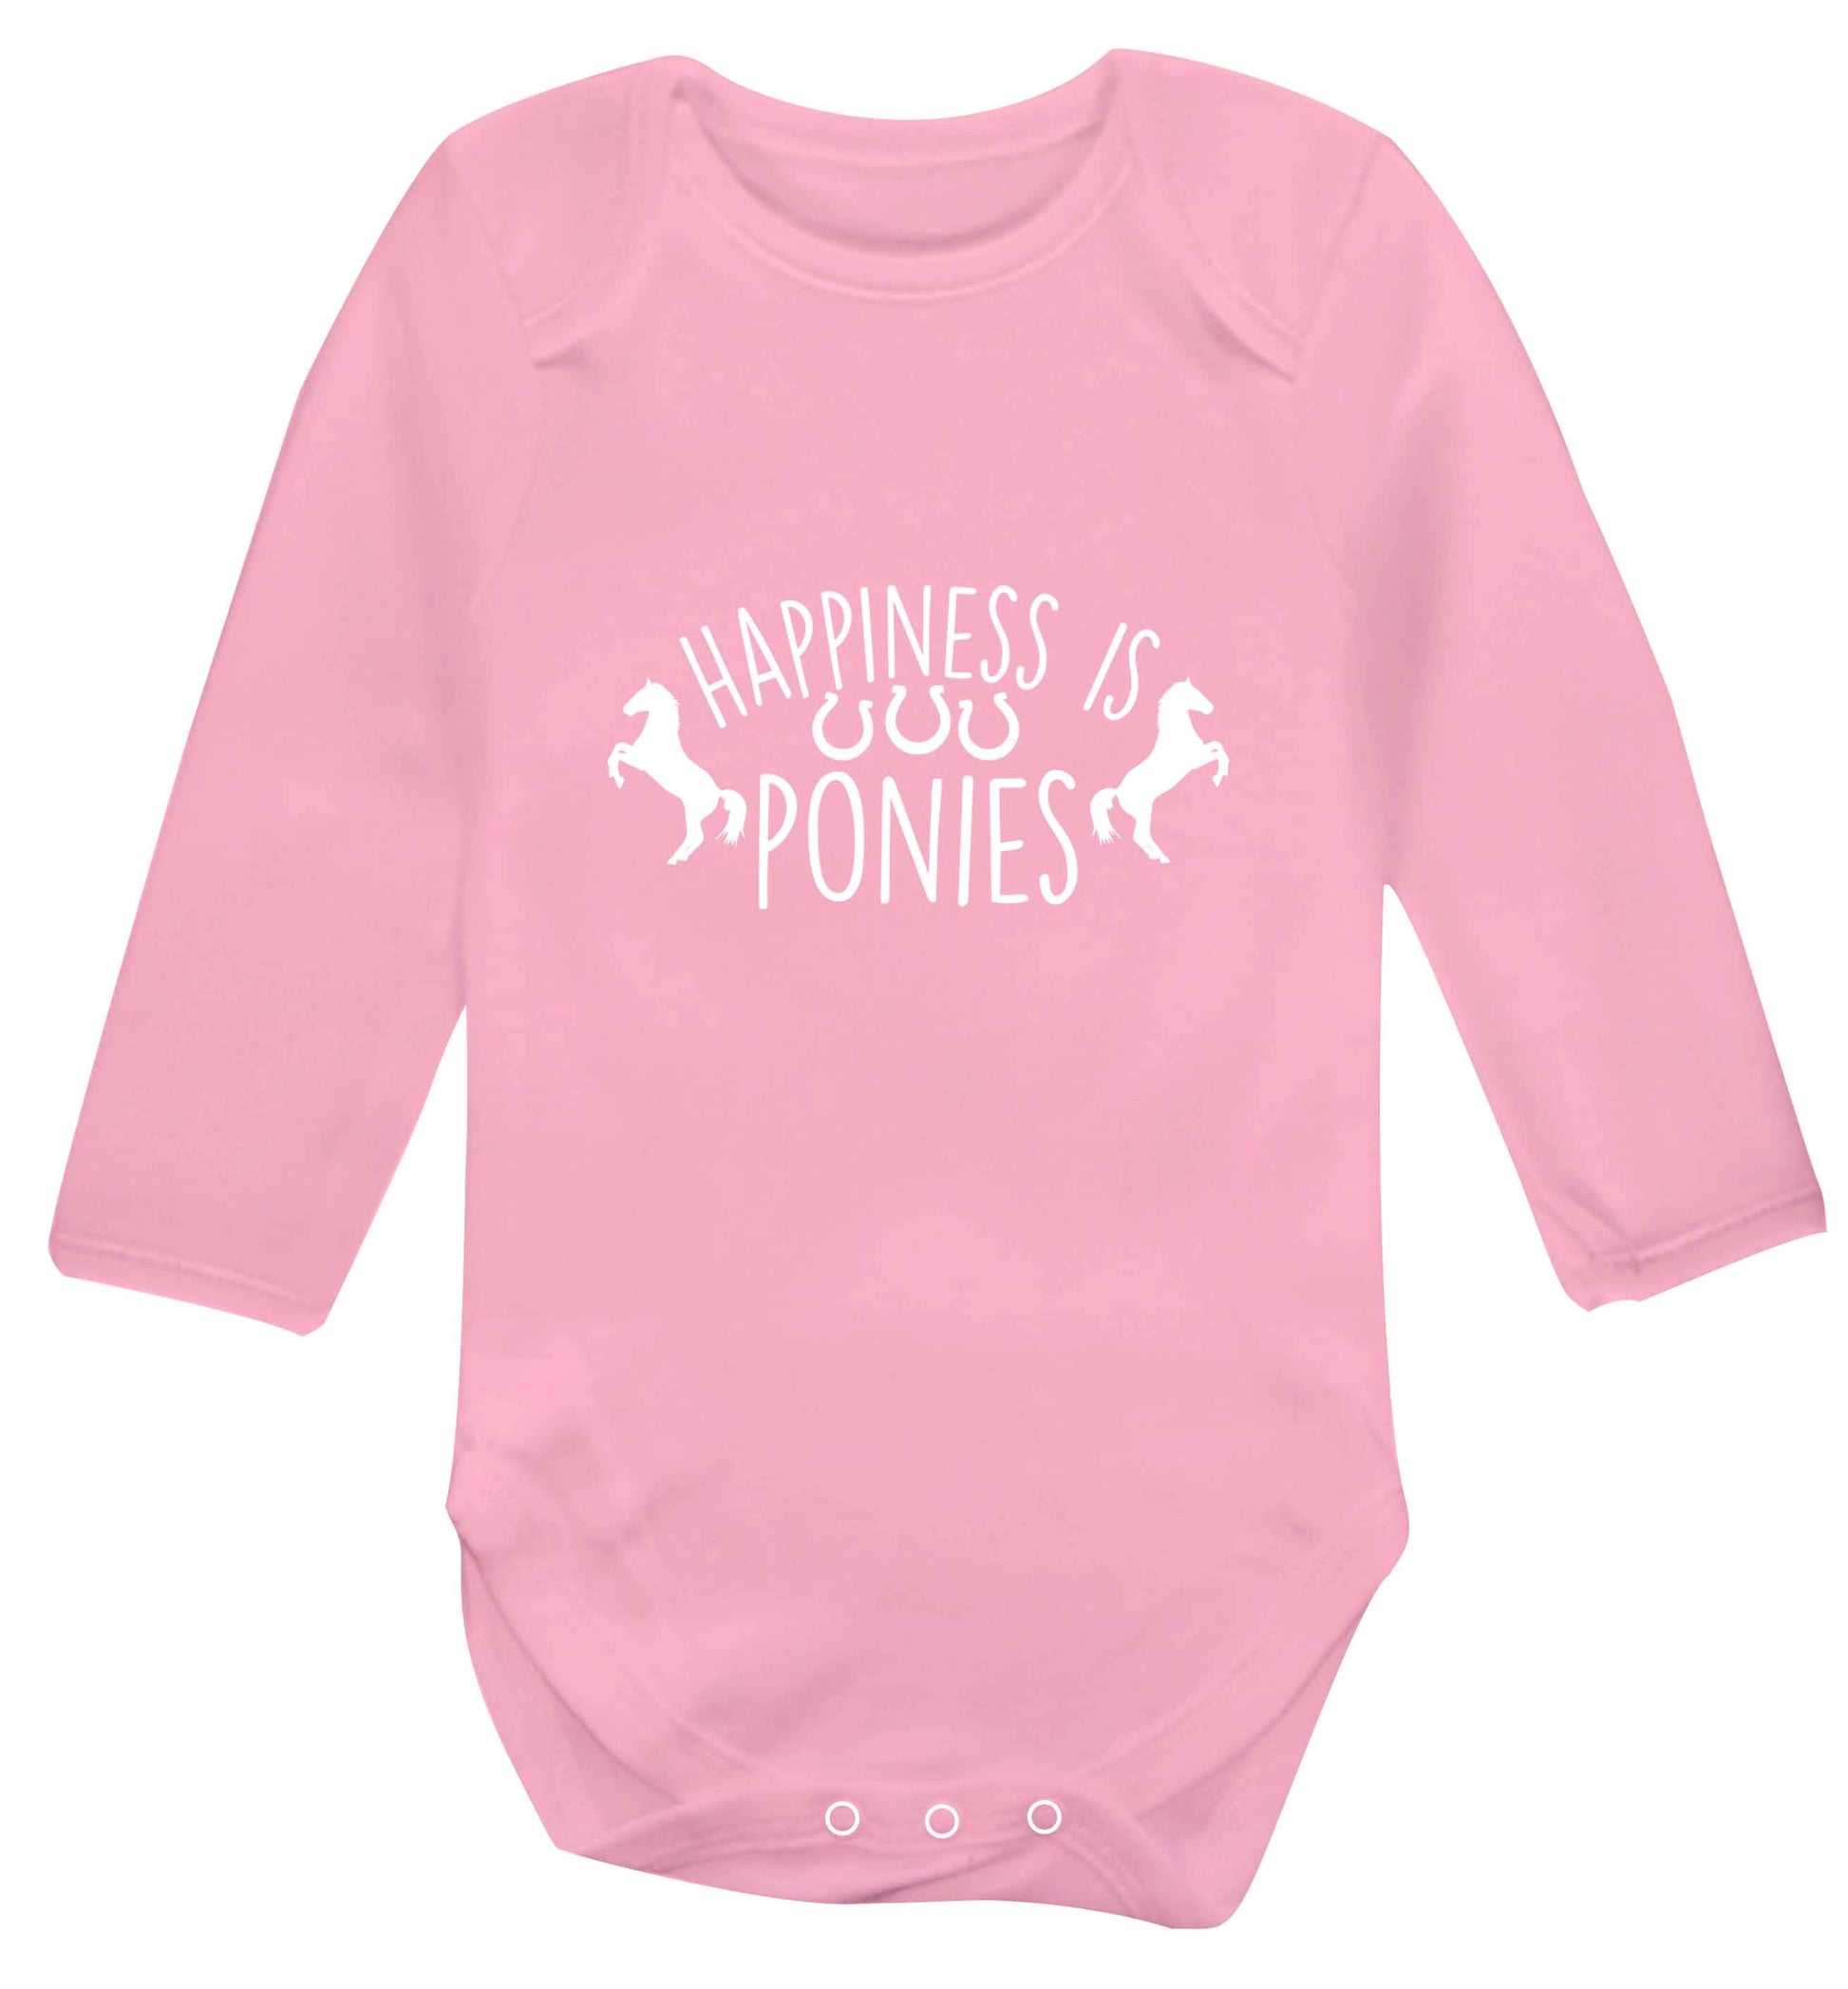 Happiness is ponies baby vest long sleeved pale pink 6-12 months